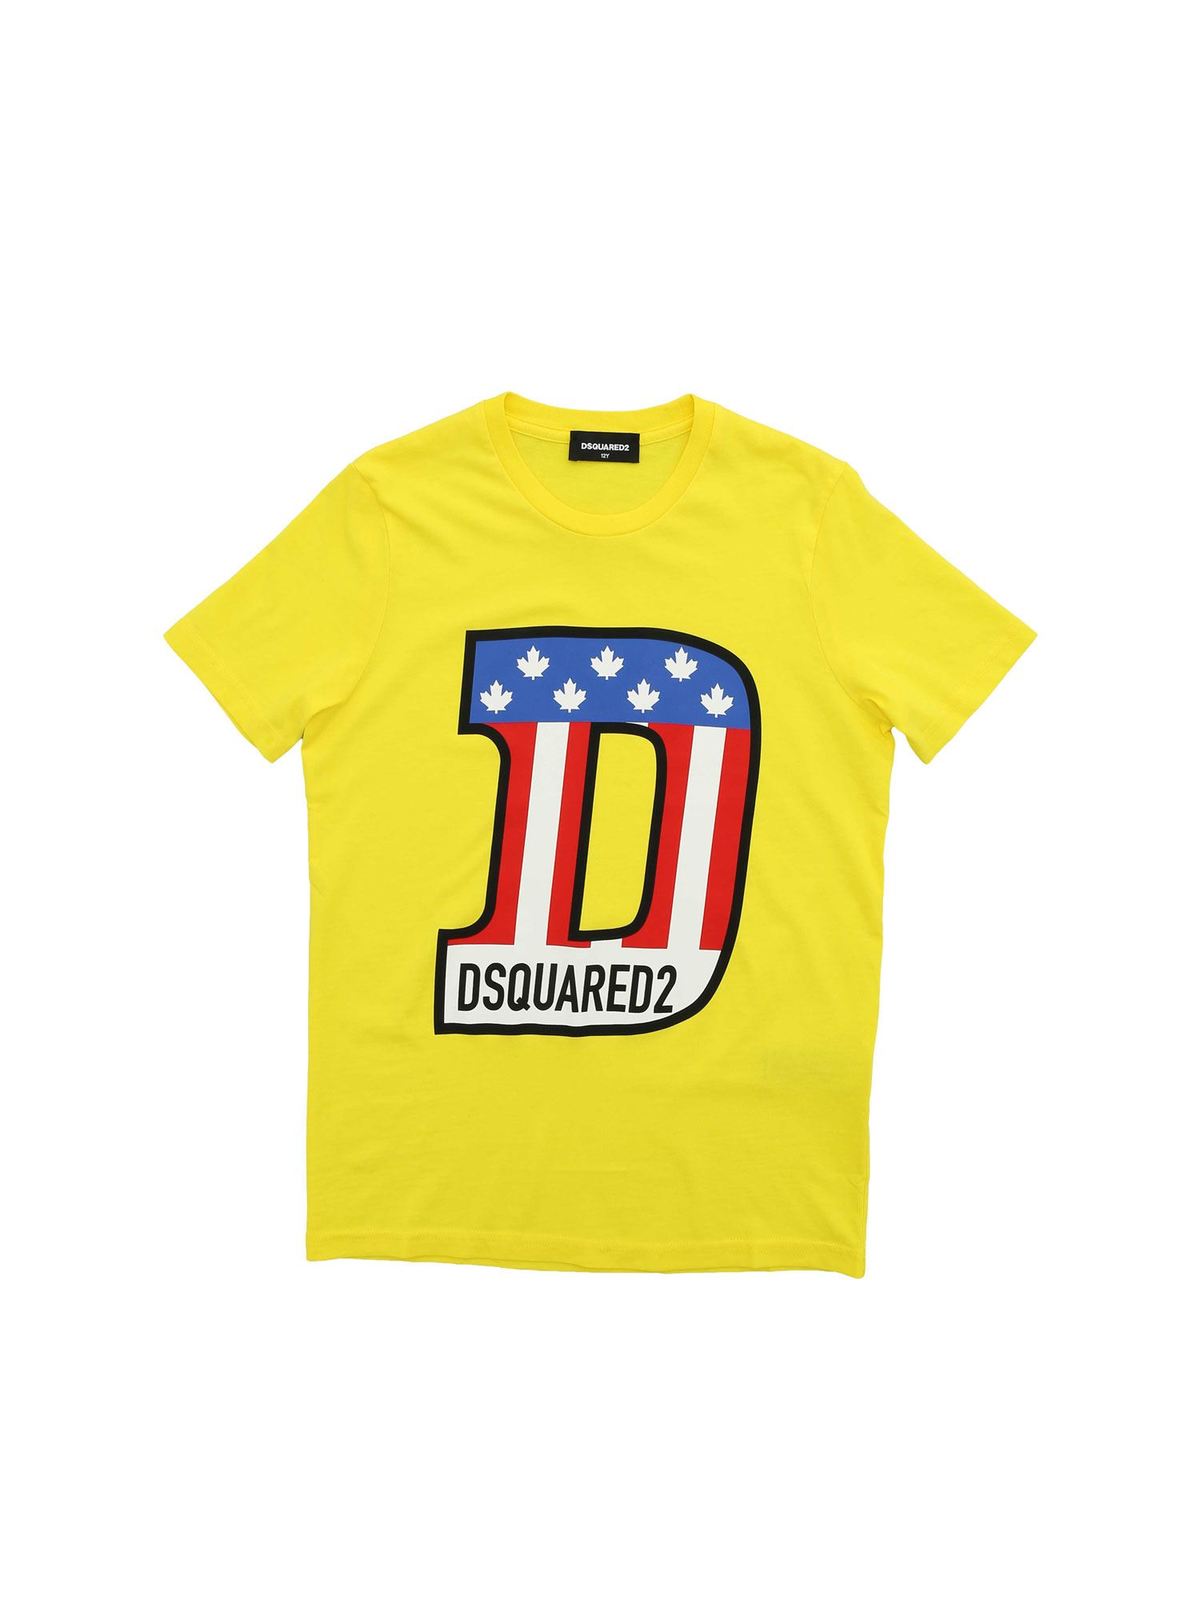 DSQUARED2 T-SHIRT IN YELLOW WITH MAXI LOGO PRINT